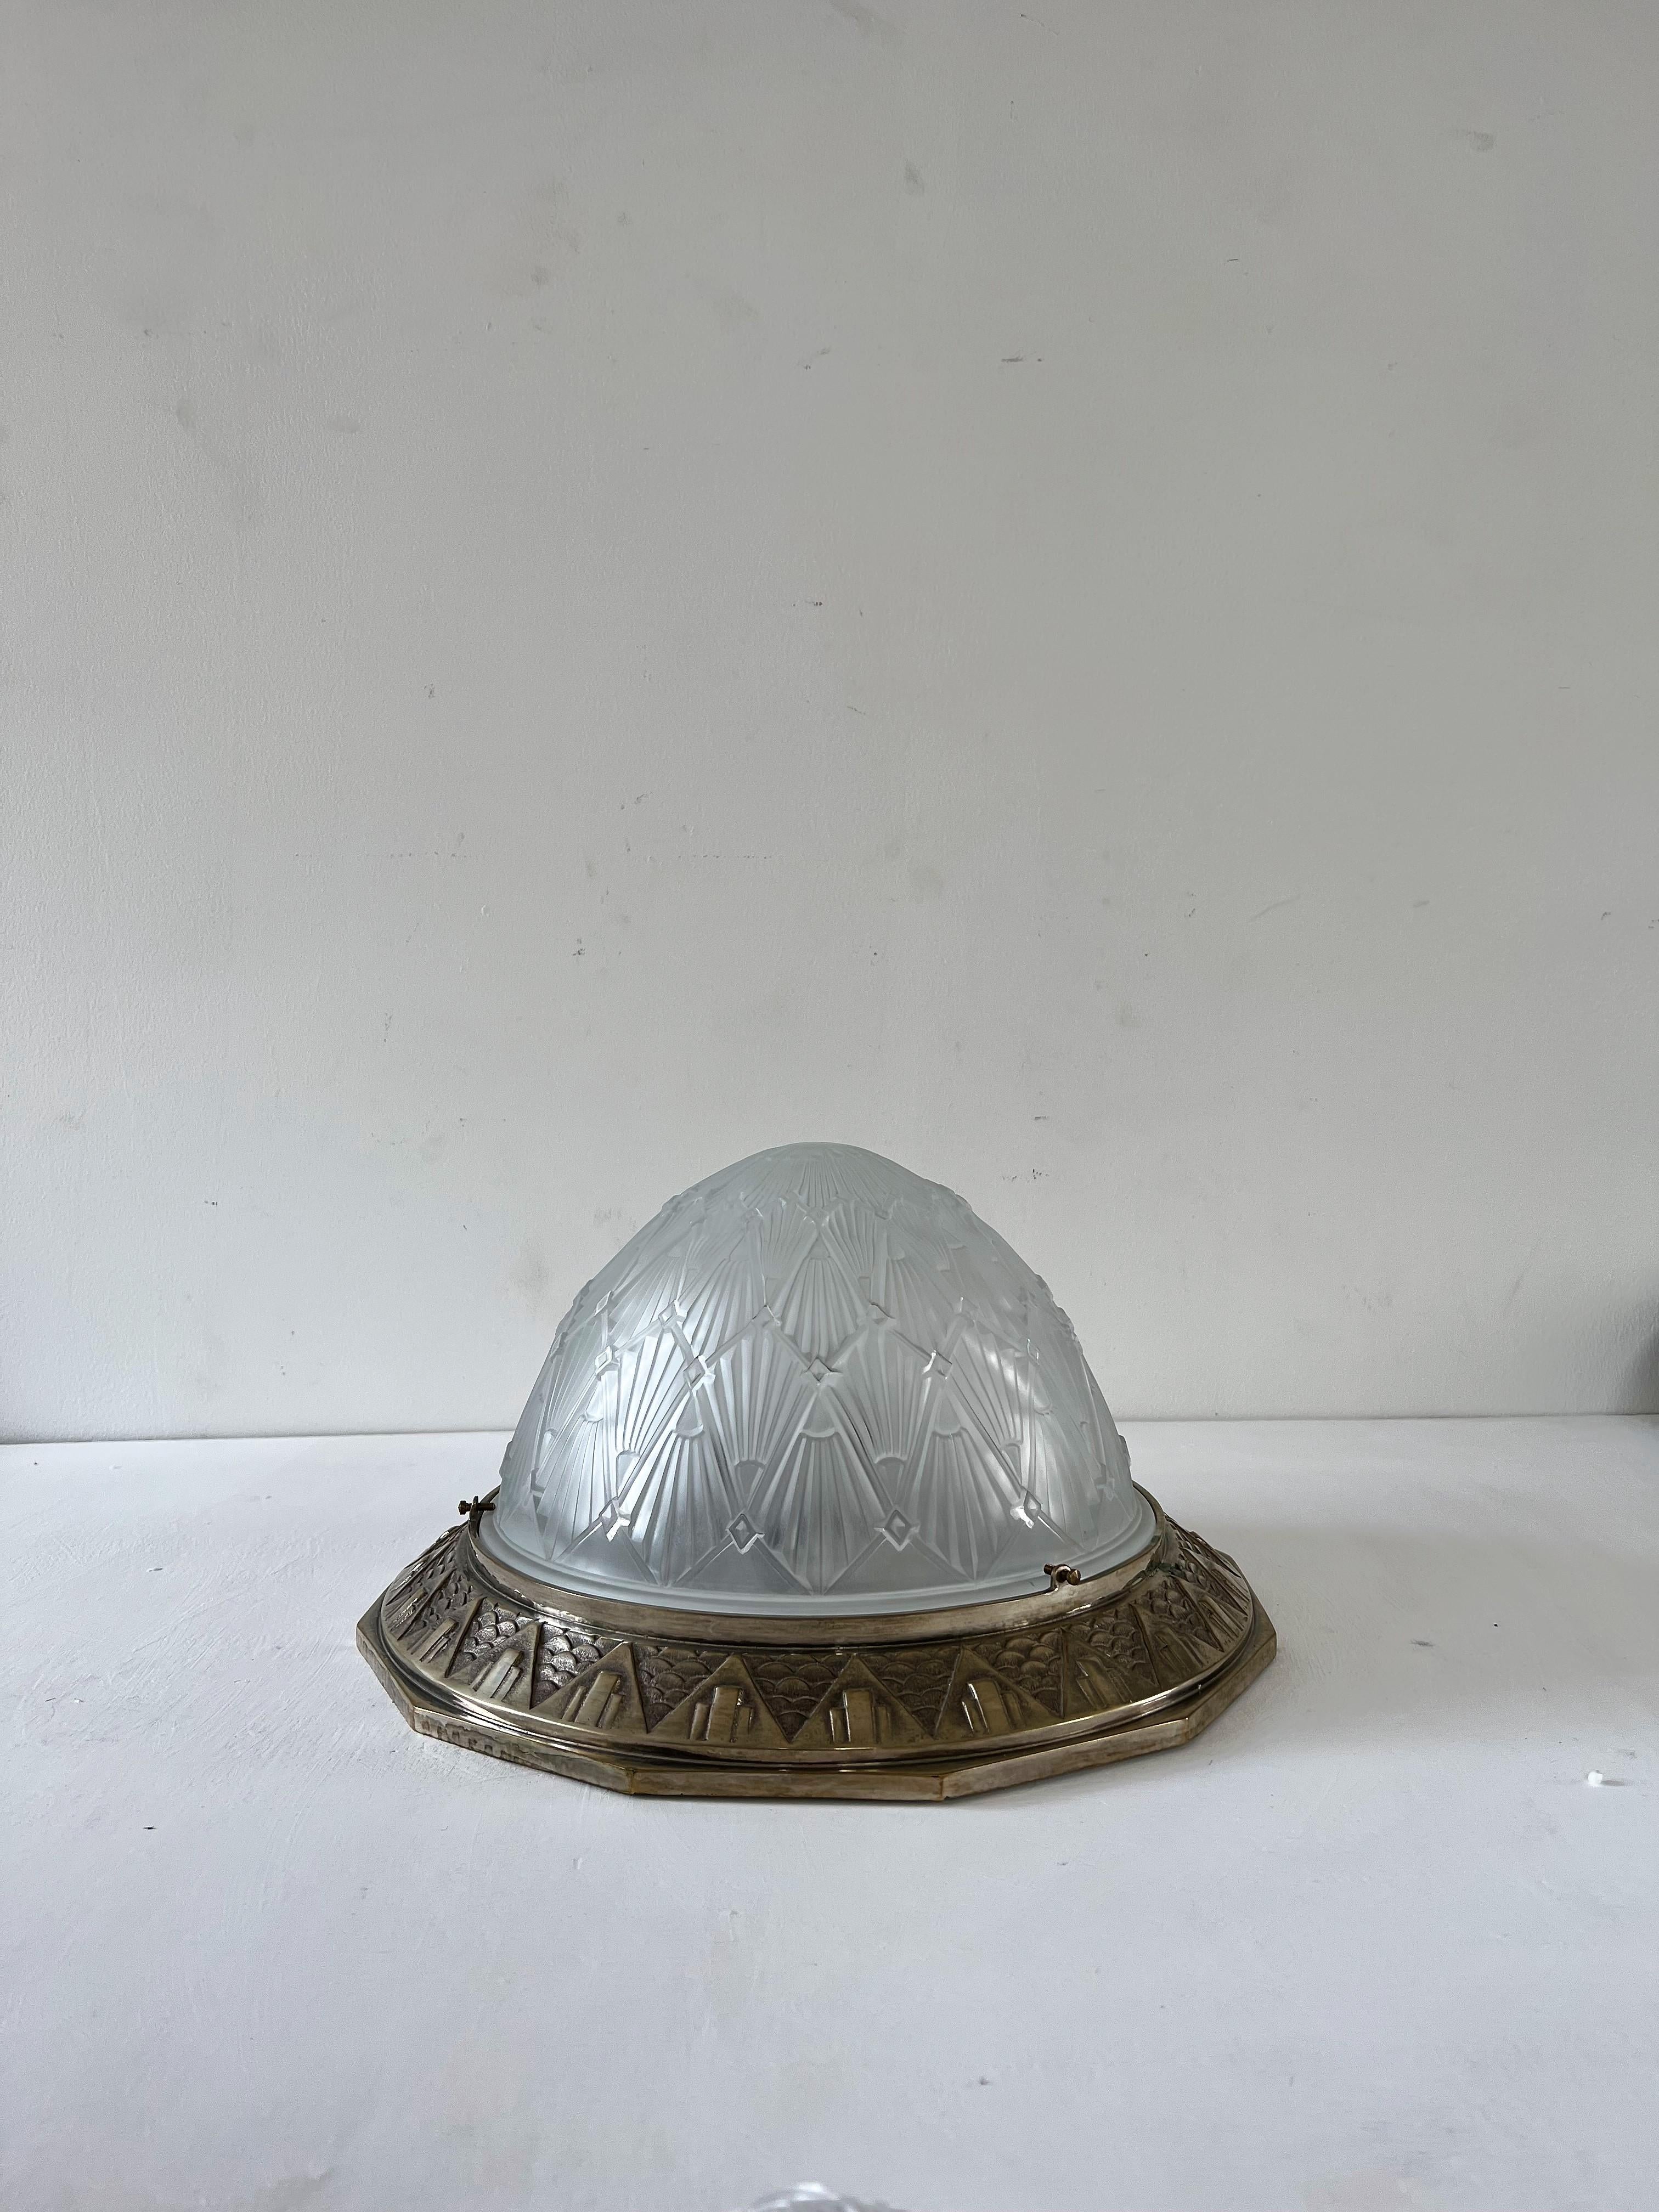 Large Art Deco Dome Flush Mount, Frosted Glas and Nickeled Bronze, France 1930s For Sale 1